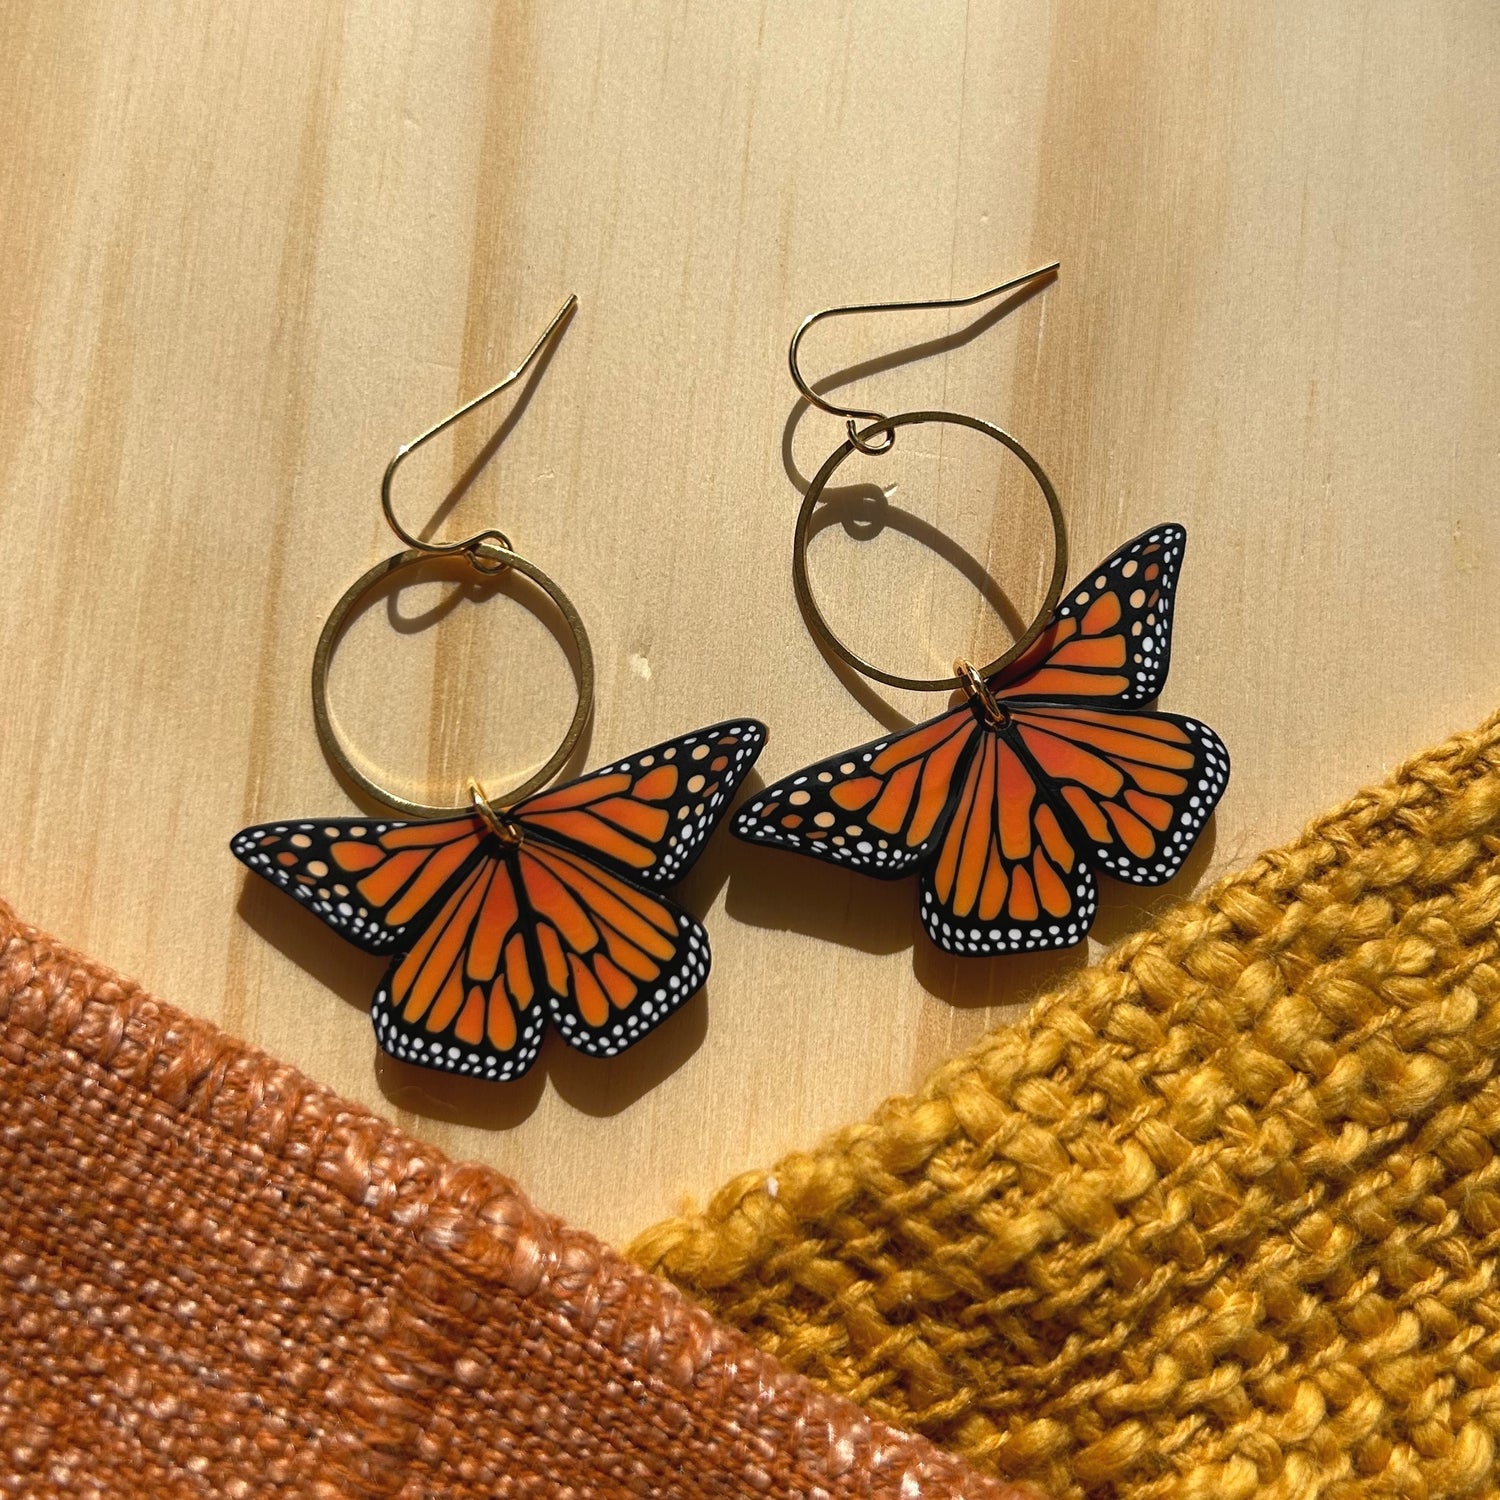 The Monarch Butterfly Collection